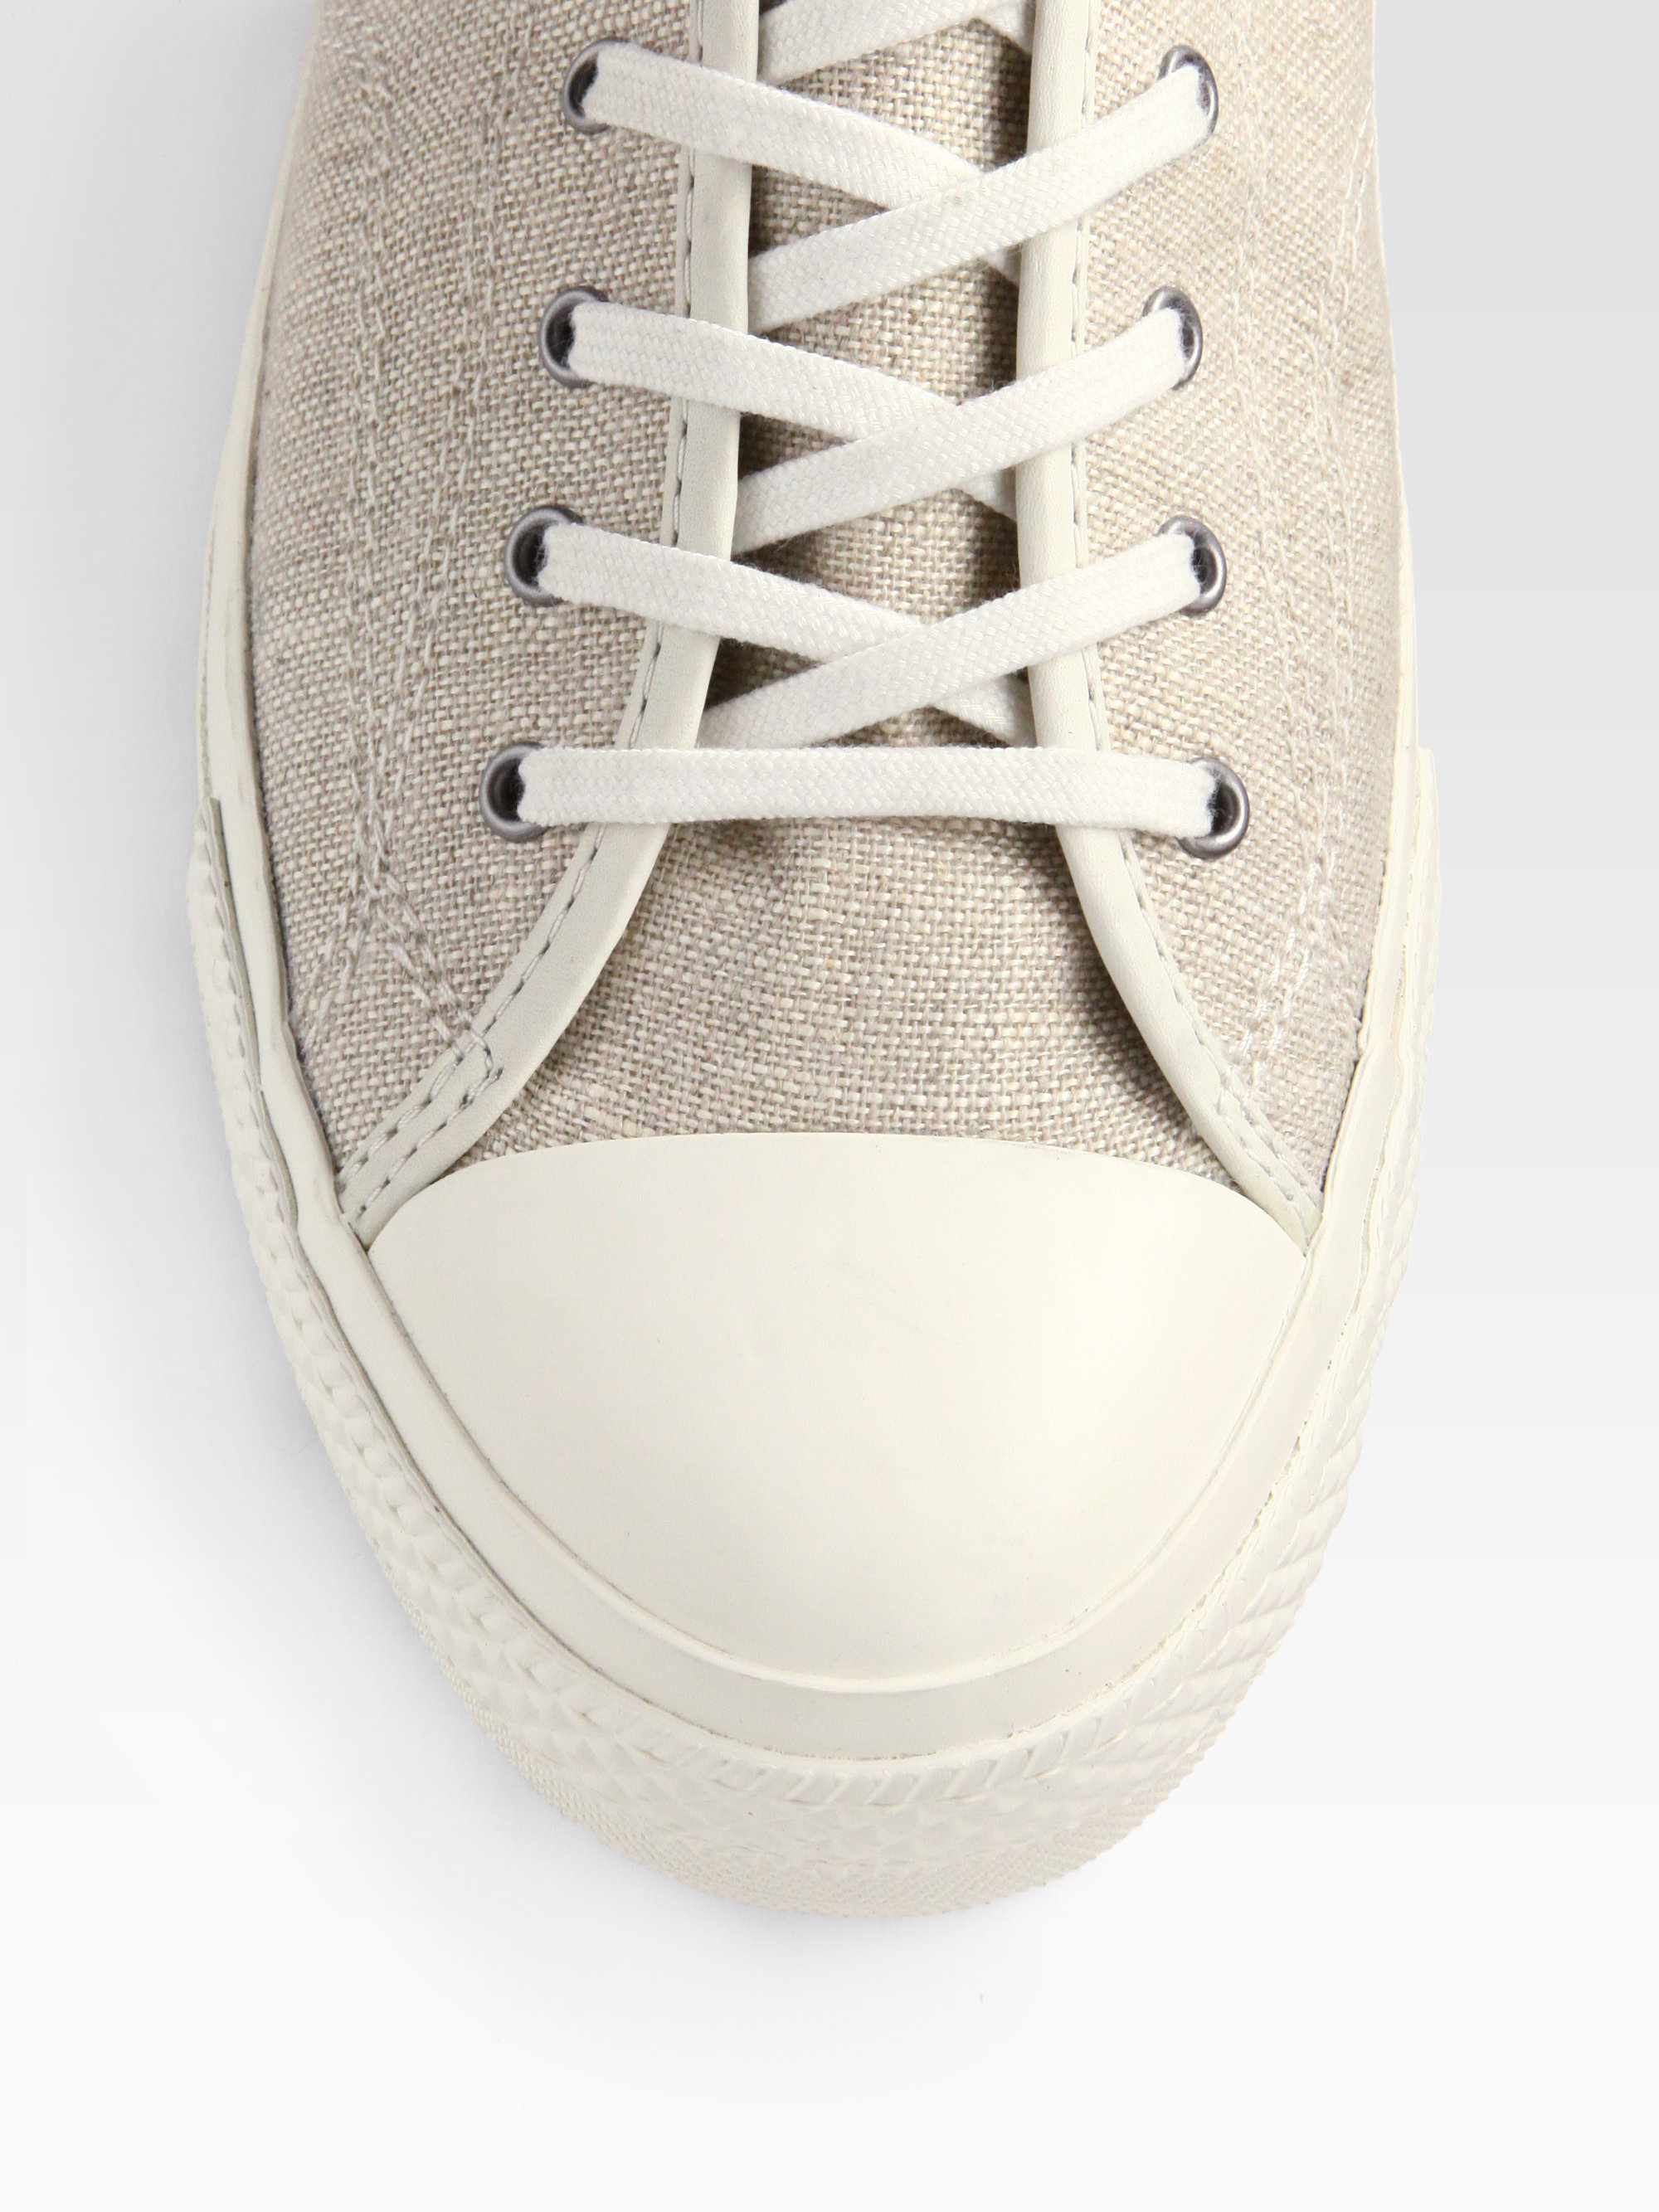 Converse Chuck Taylor Linen Oxfordswhite in Natural for Men - Lyst